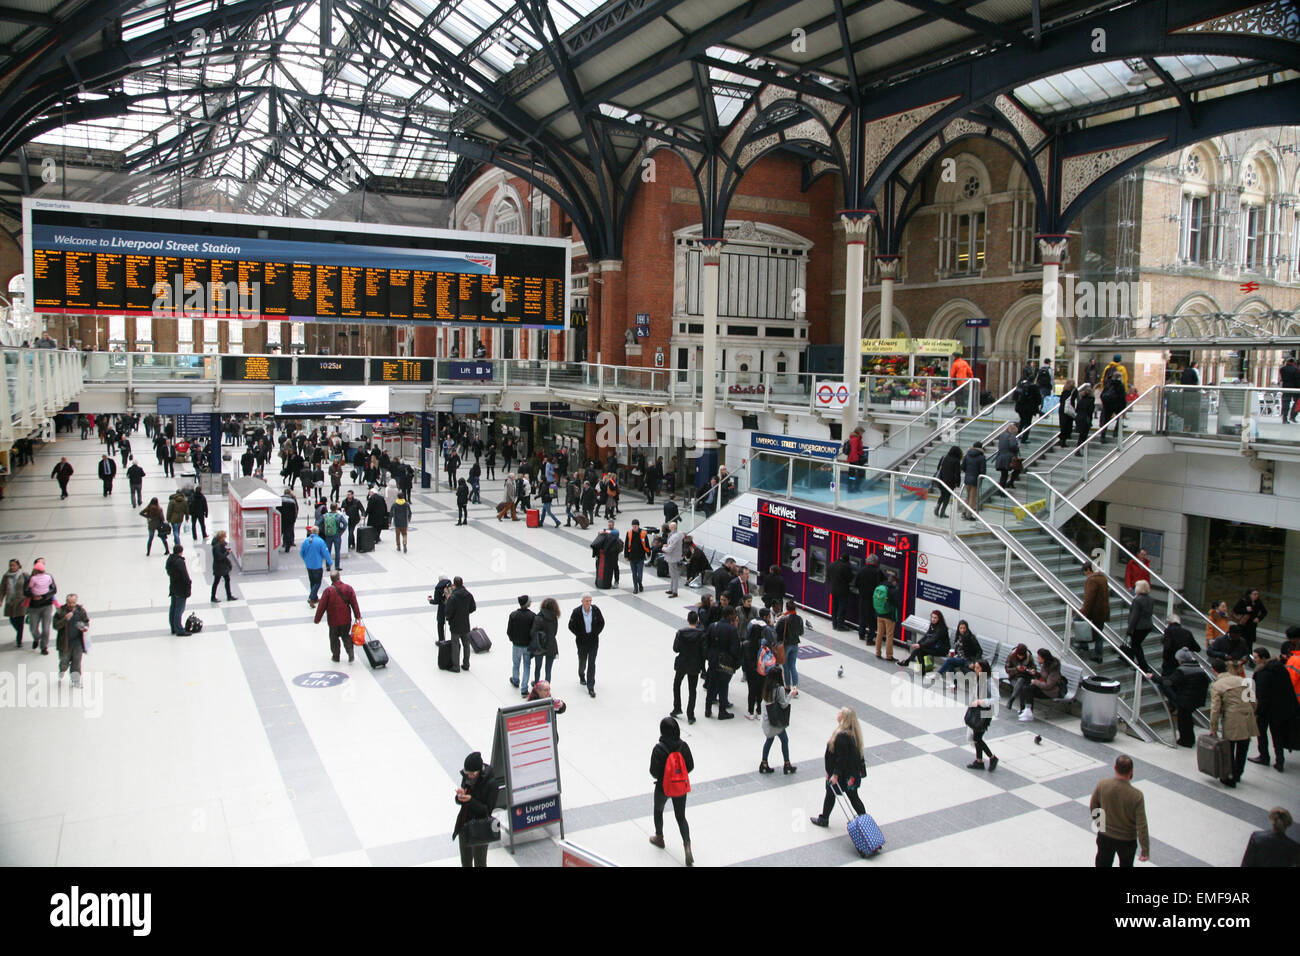 Liverpool Street Station, interior view with commuters and travellers. Stock Photo